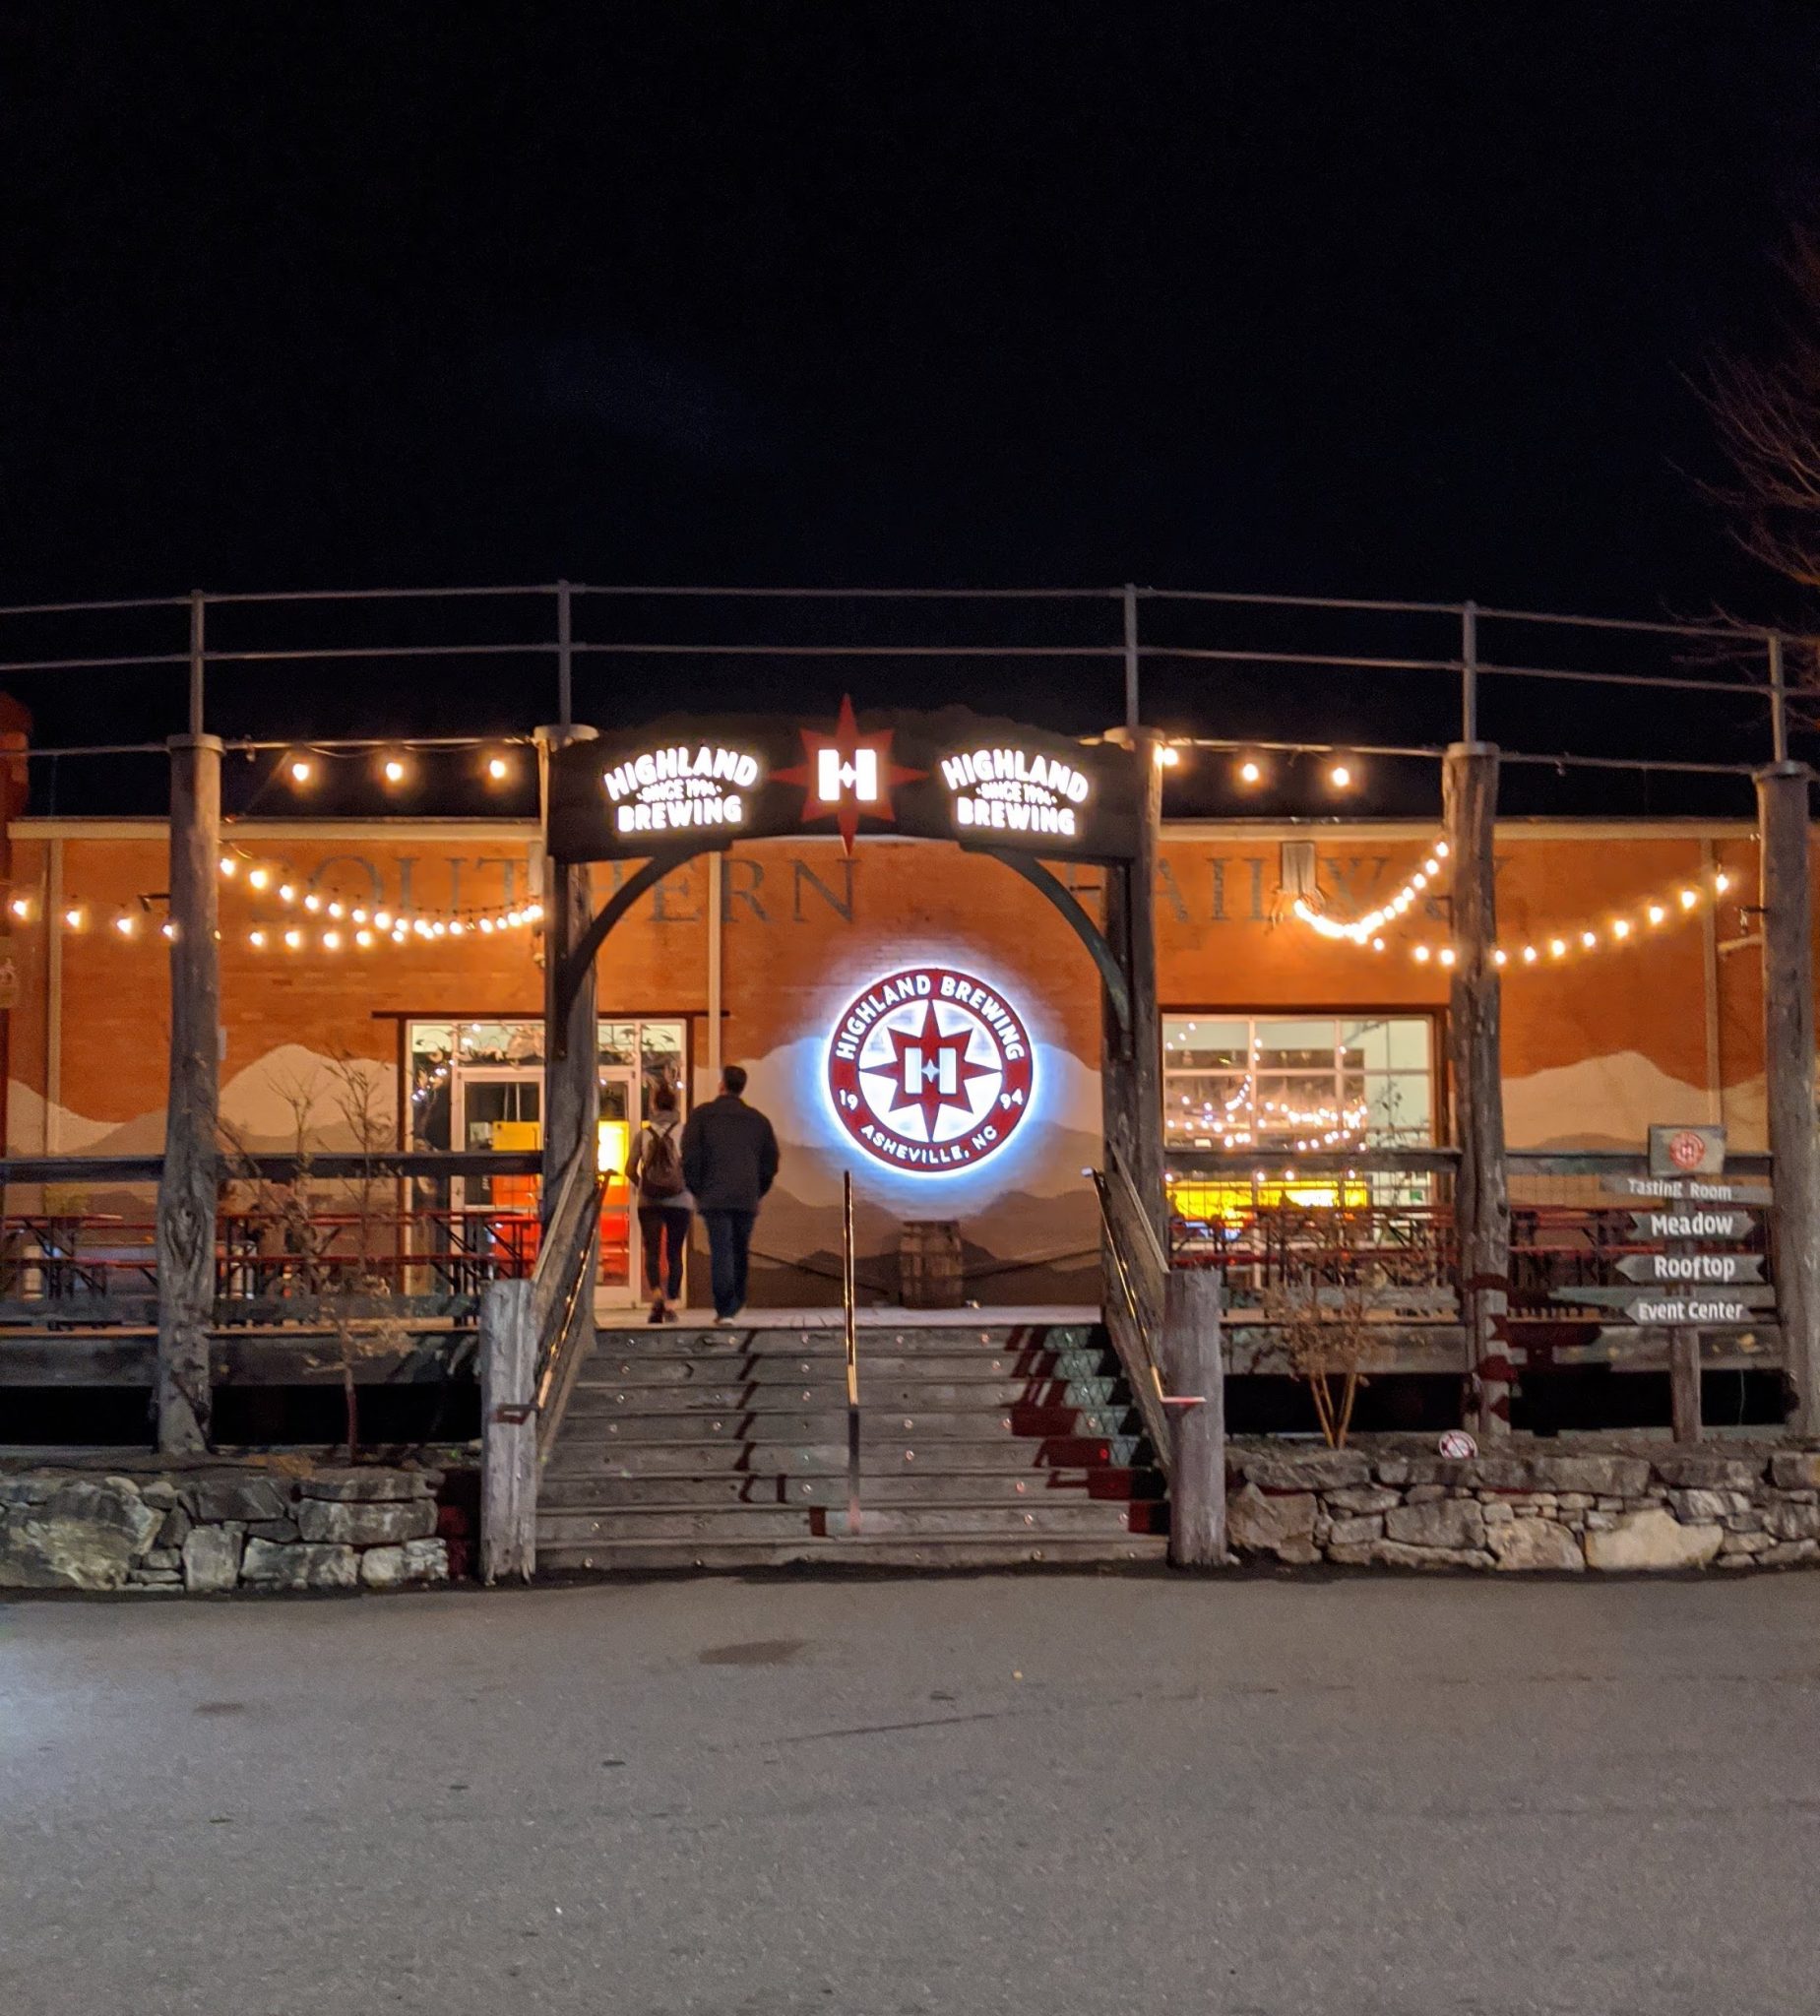 Two people walking into the front doors at Highland Brewing Company at night. There is a sign with the Highland logo and it is lit up.